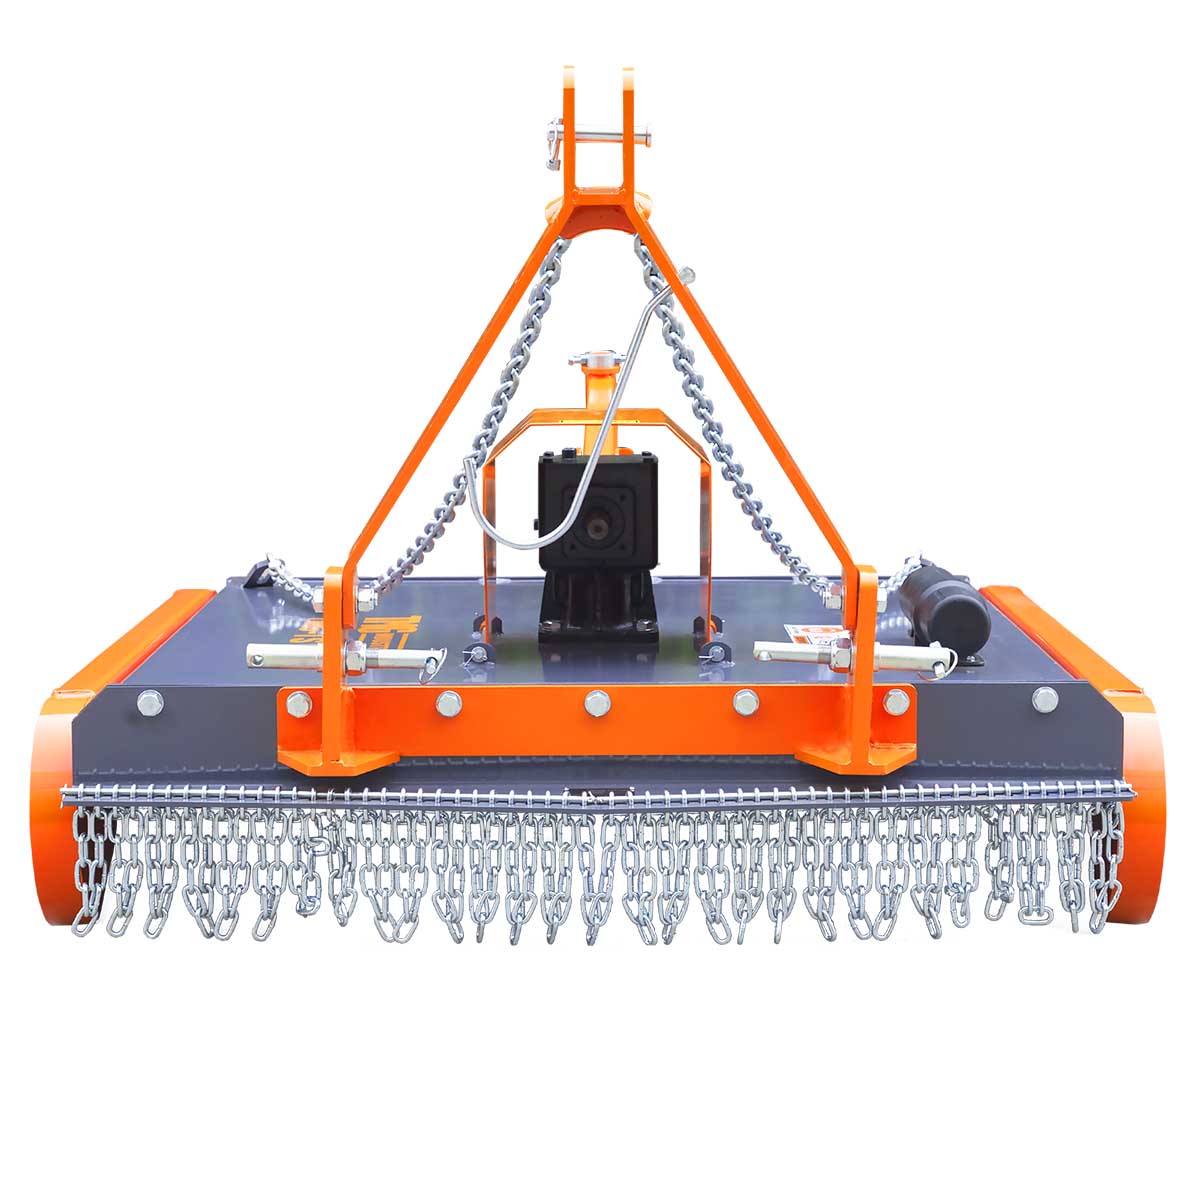 TMG Industrial 48” 3-Point Hitch Slasher Topper Mower, Category 1 & 2, PTO shaft included, TMG-TST48